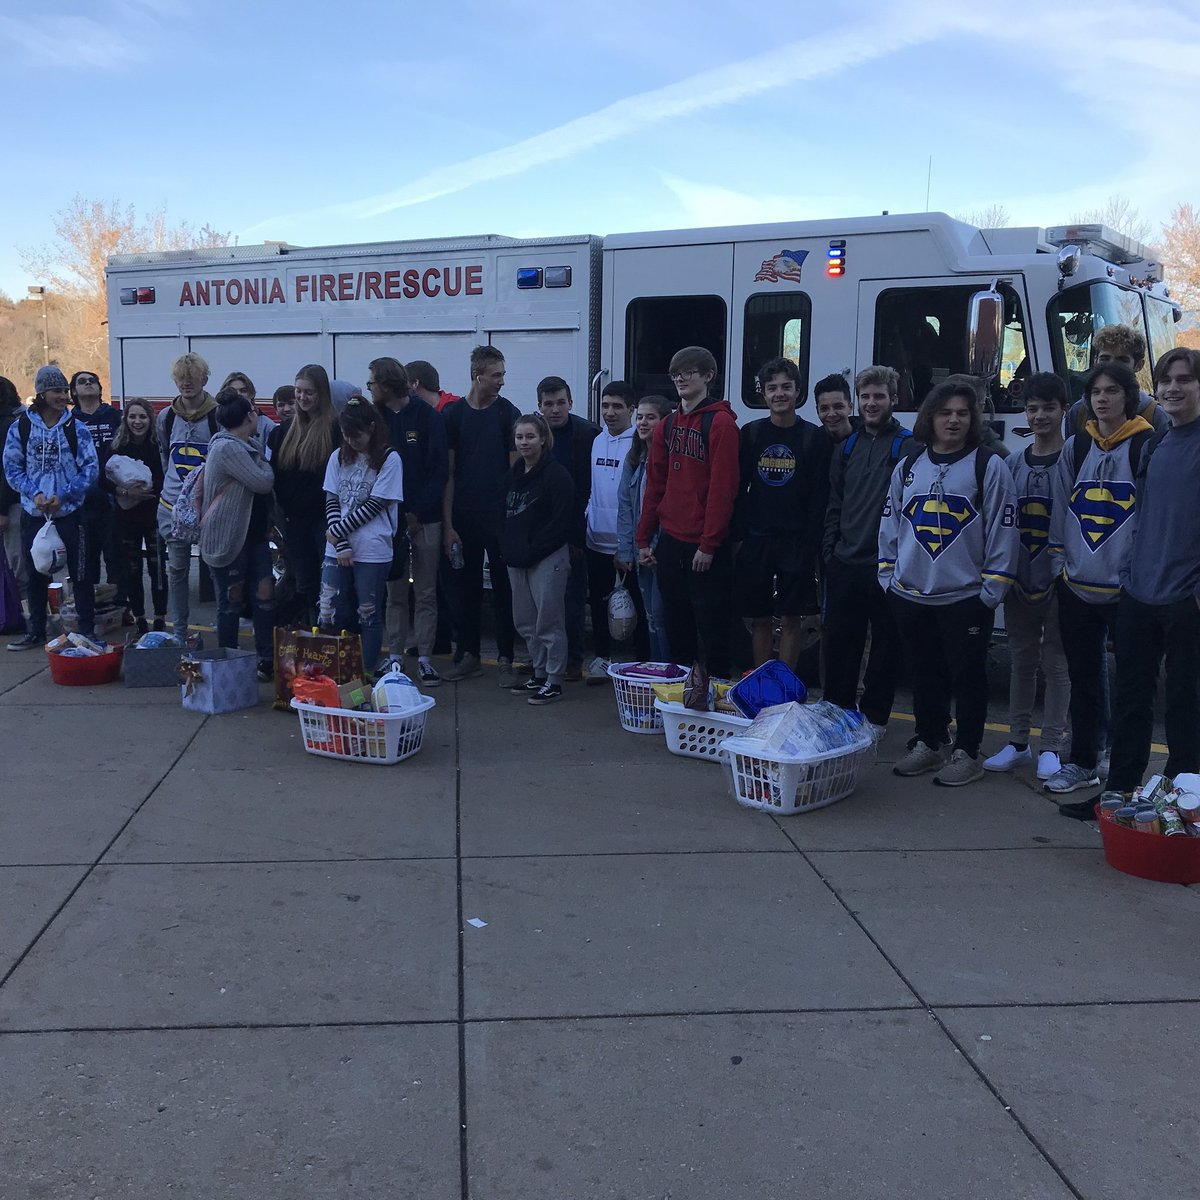 Thanks CCE students for helping our community! These turkey baskets are being delivered today by Antonia Fire Department to families in need.